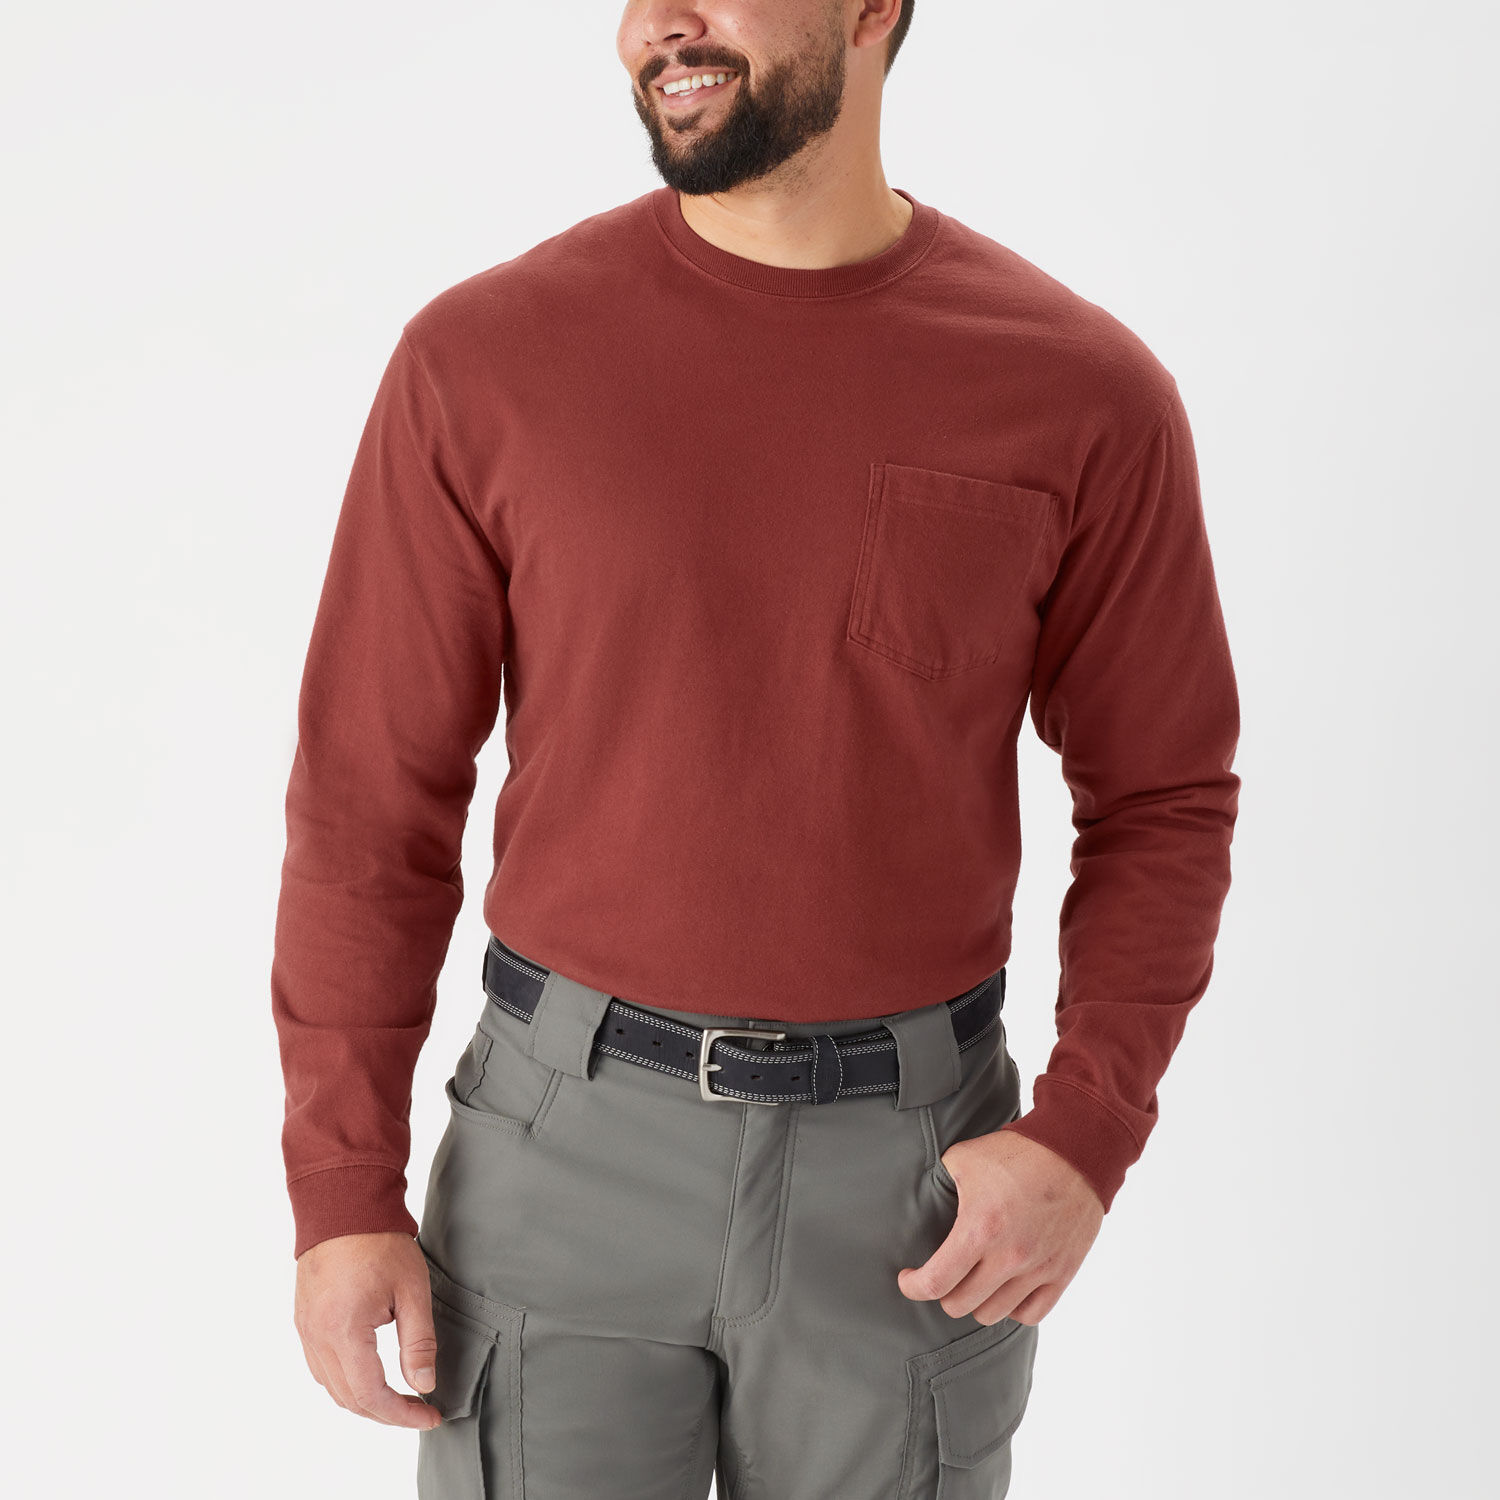 Men's Longtail T Long Sleeve T-Shirt with Pocket | Duluth Trading